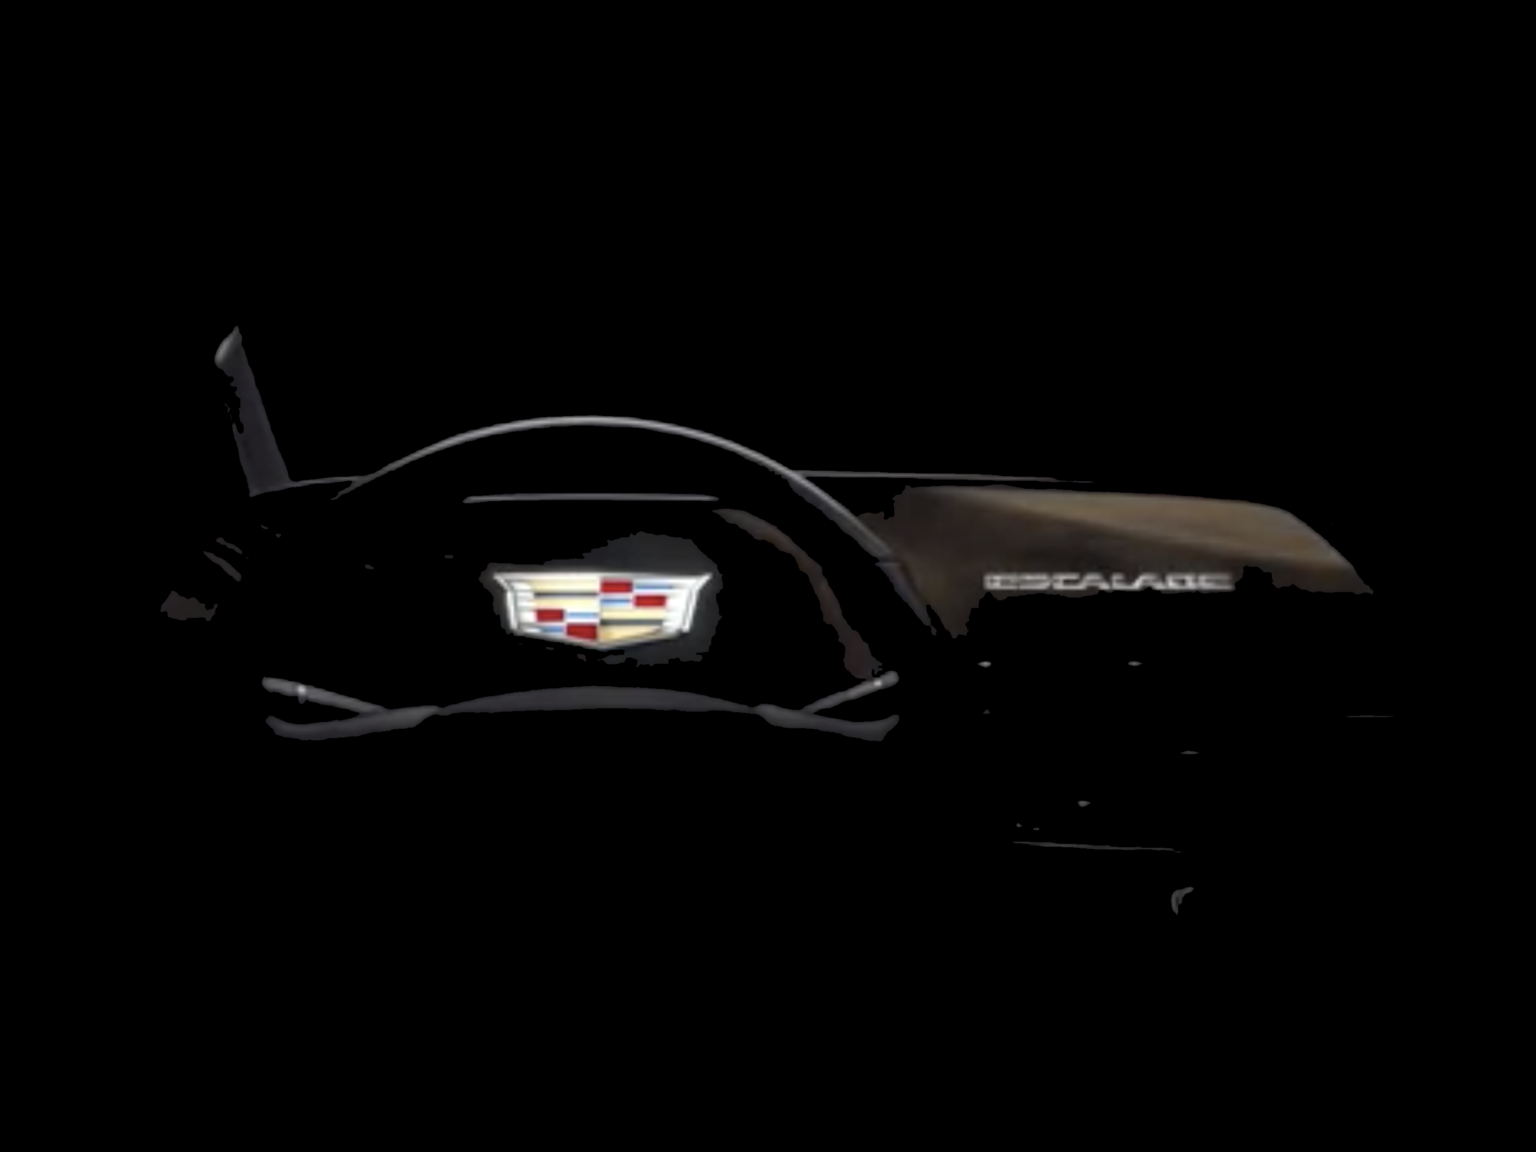 Cadillac teased the curved screen with a short promo video.